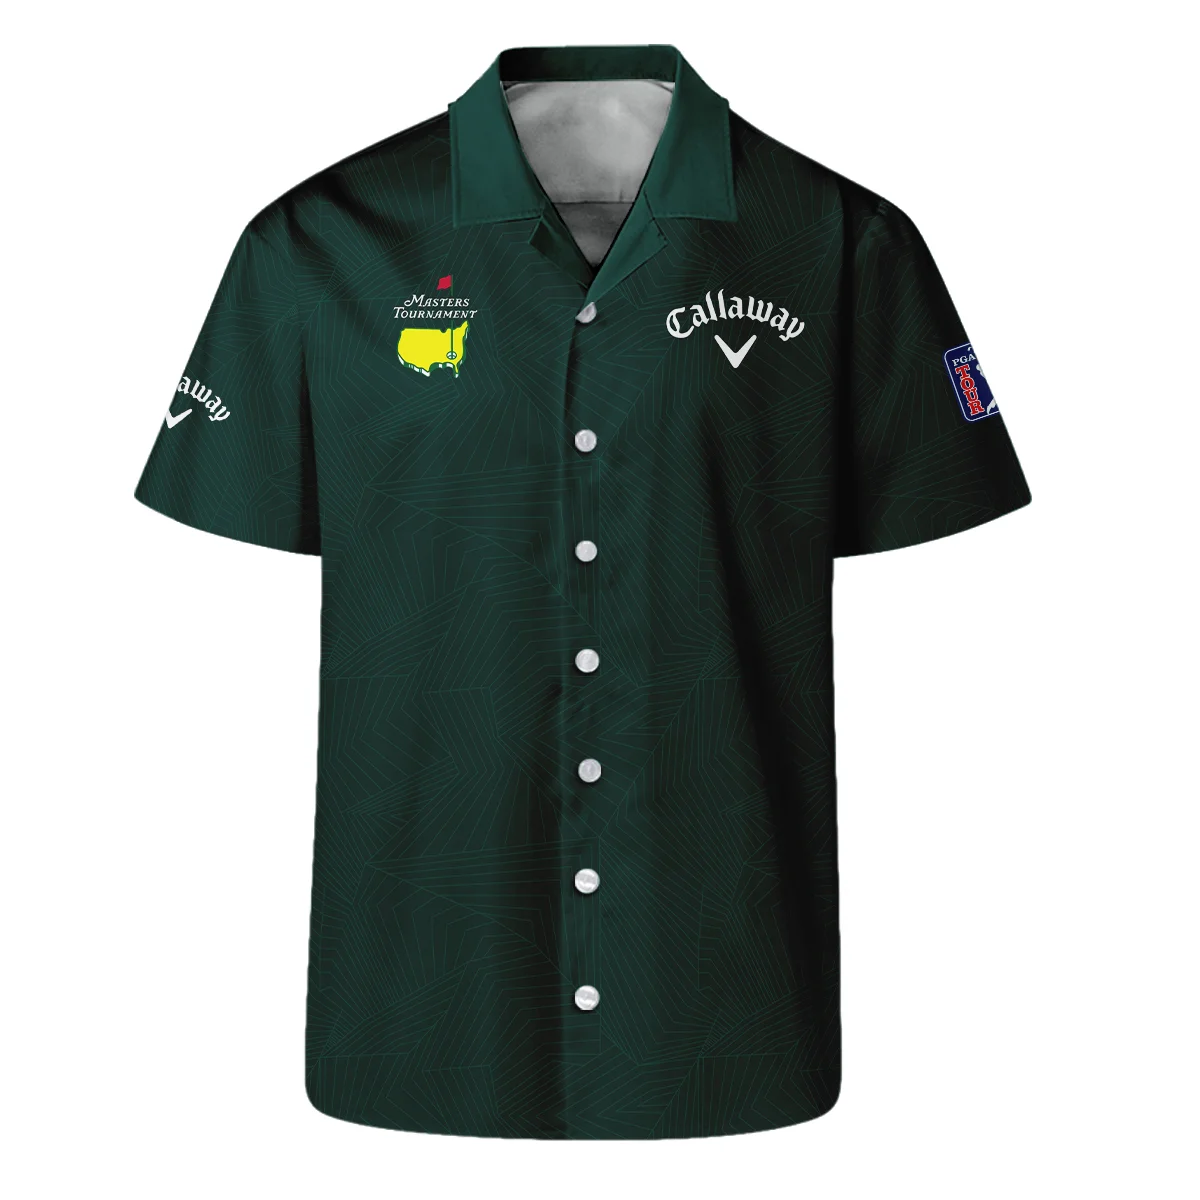 Masters Tournament Callaway Pattern Sport Jersey Dark Green Polo Shirt Style Classic Polo Shirt For Men